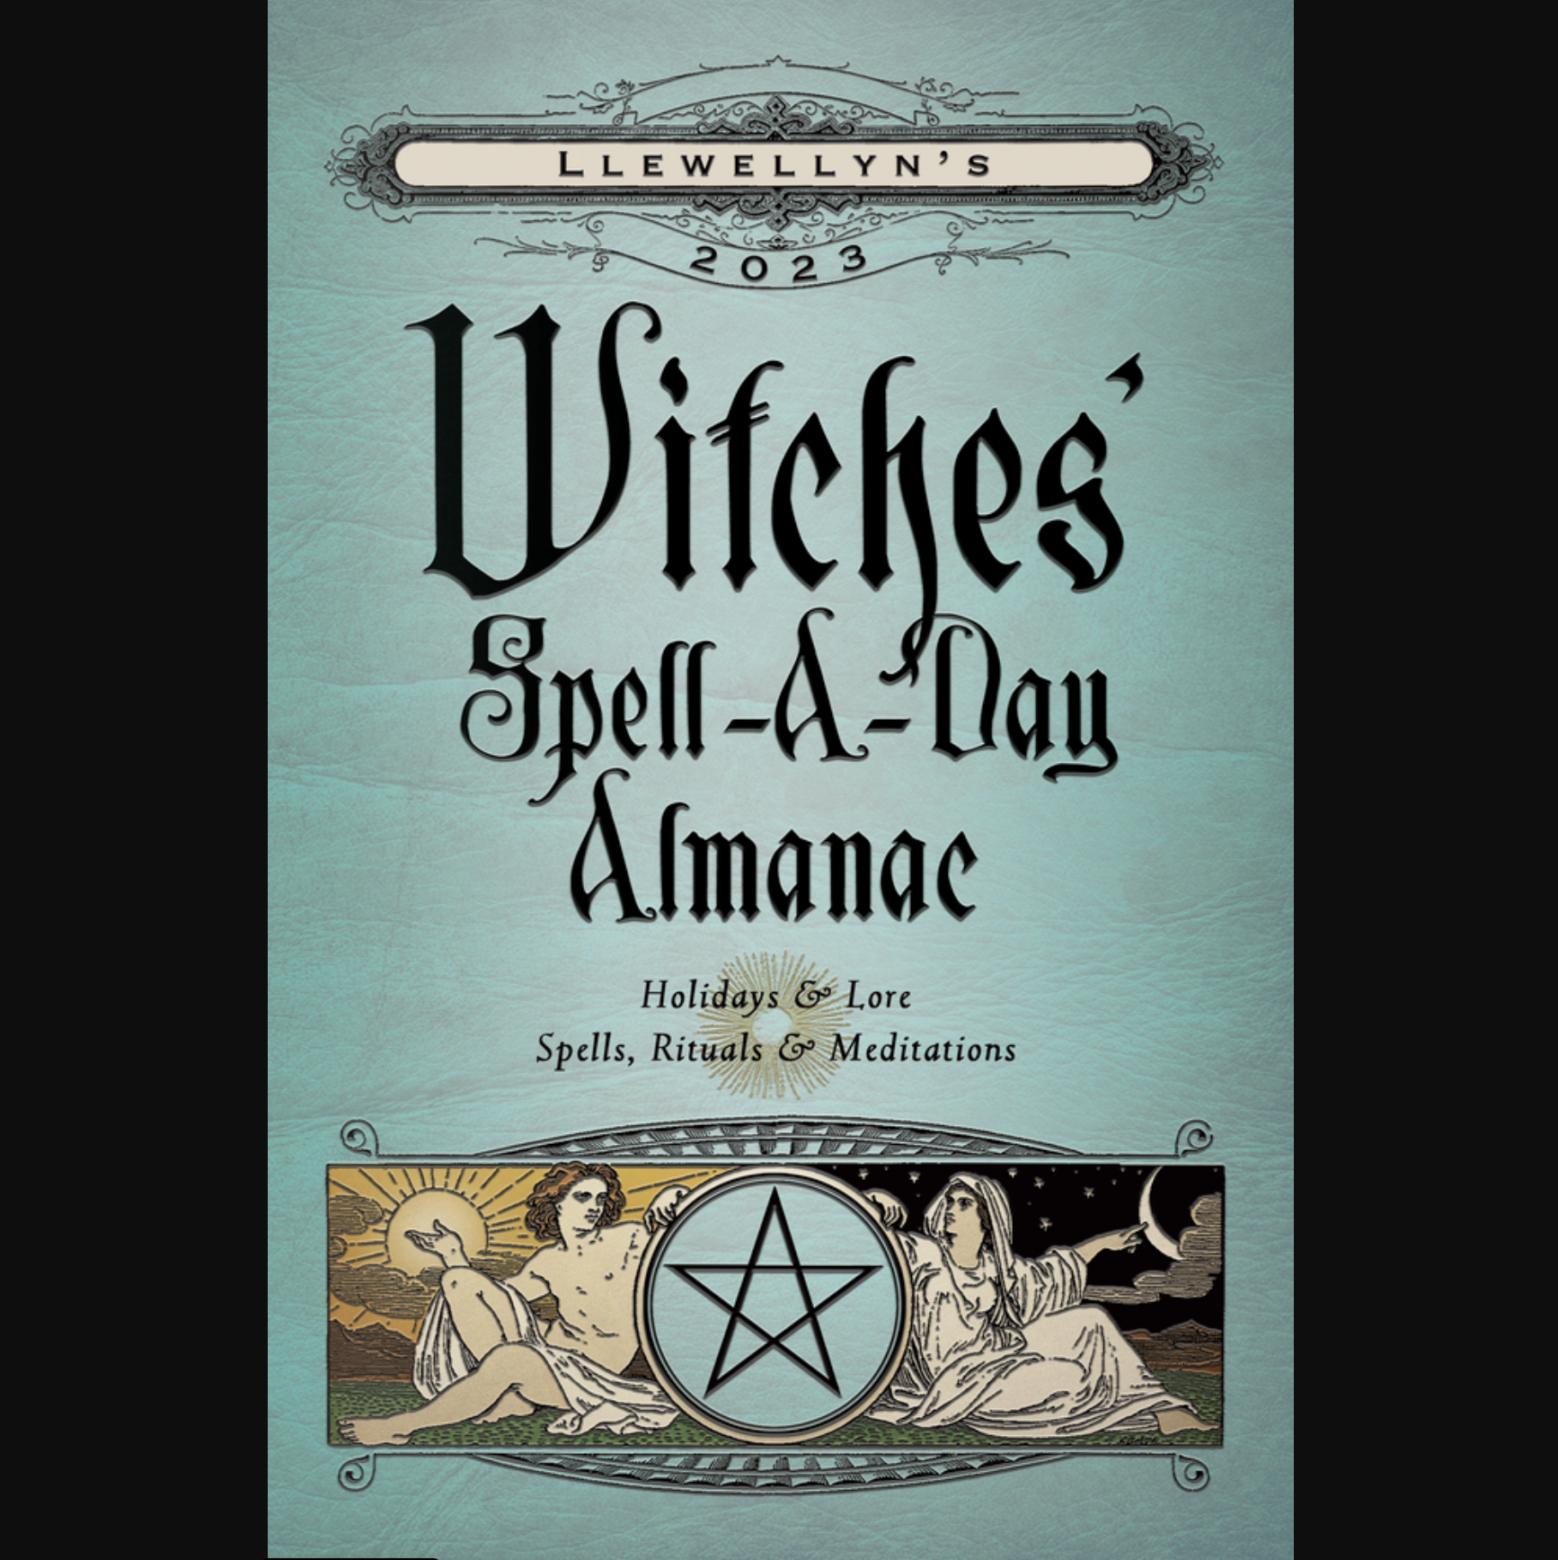 Llewellyn's 2023 Witches' Spell-a-Day Almanac